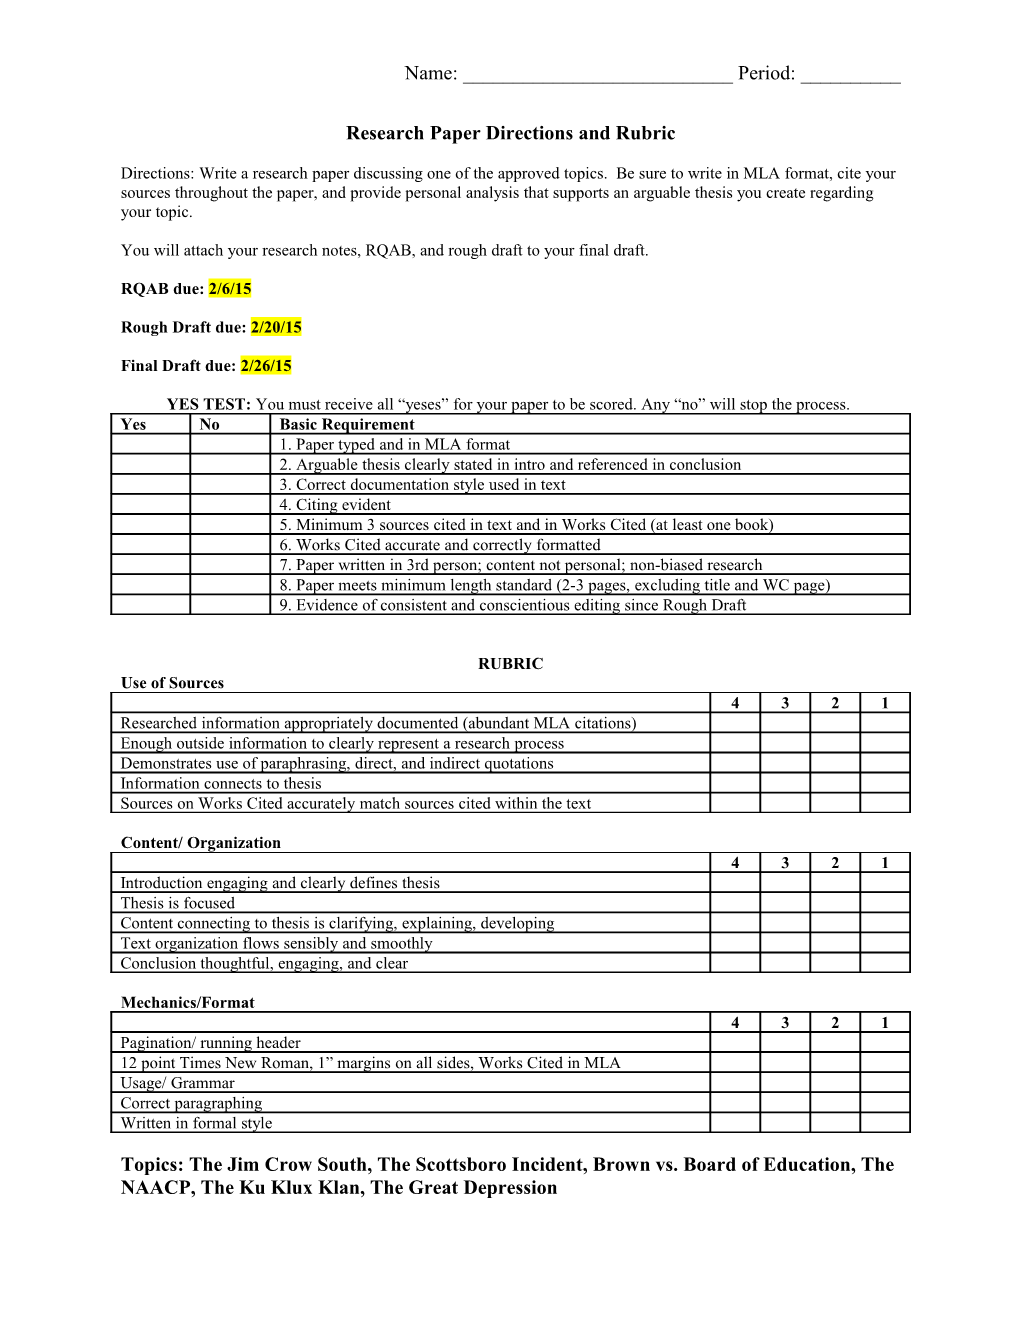 Research Paper Directions and Rubric